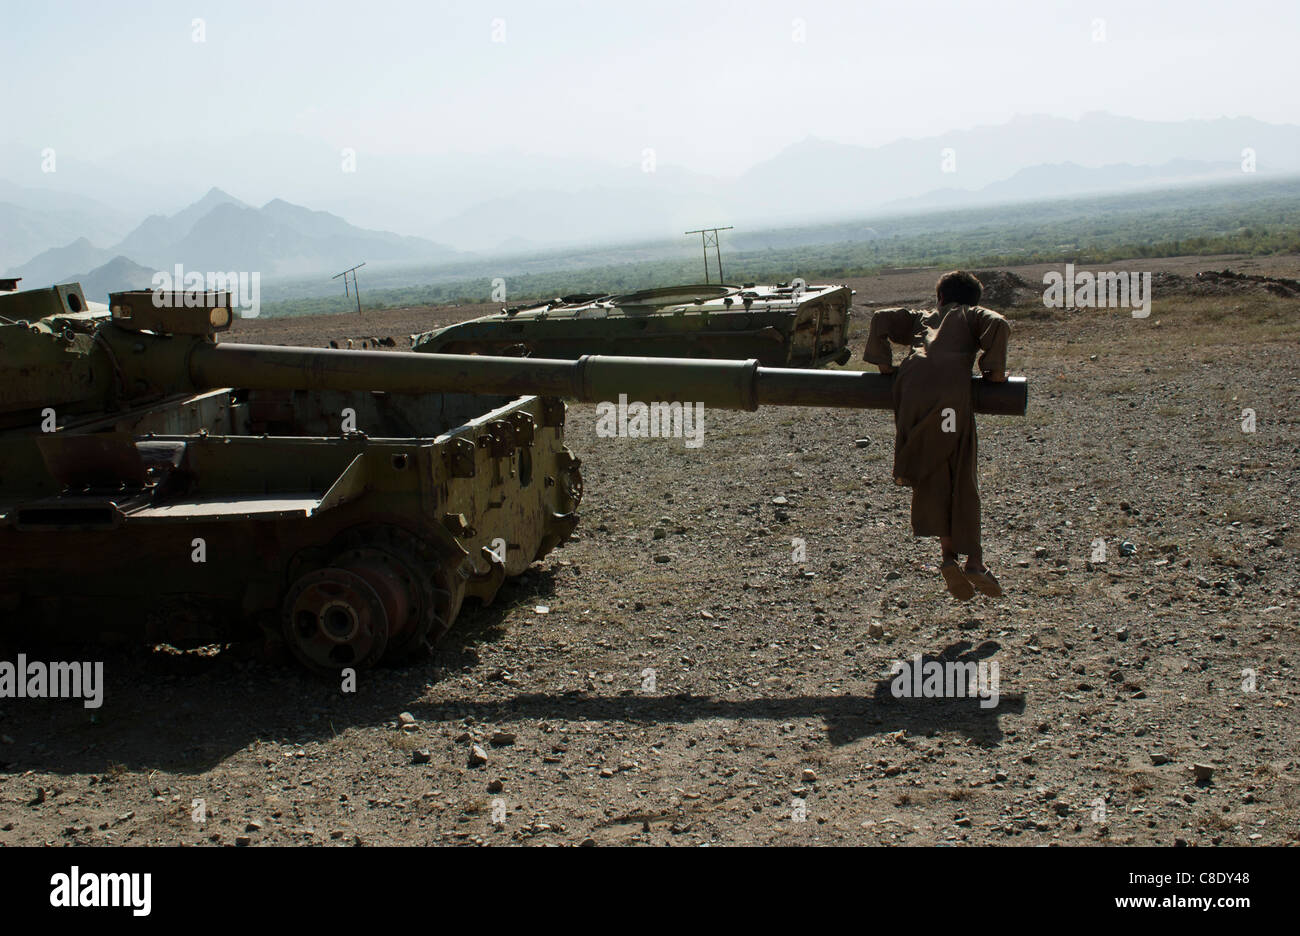 A child plays on an abandoned Soviet era tank outside Tawakh, near the Panjshir Valley, Afghanistan, October 2004. Stock Photo